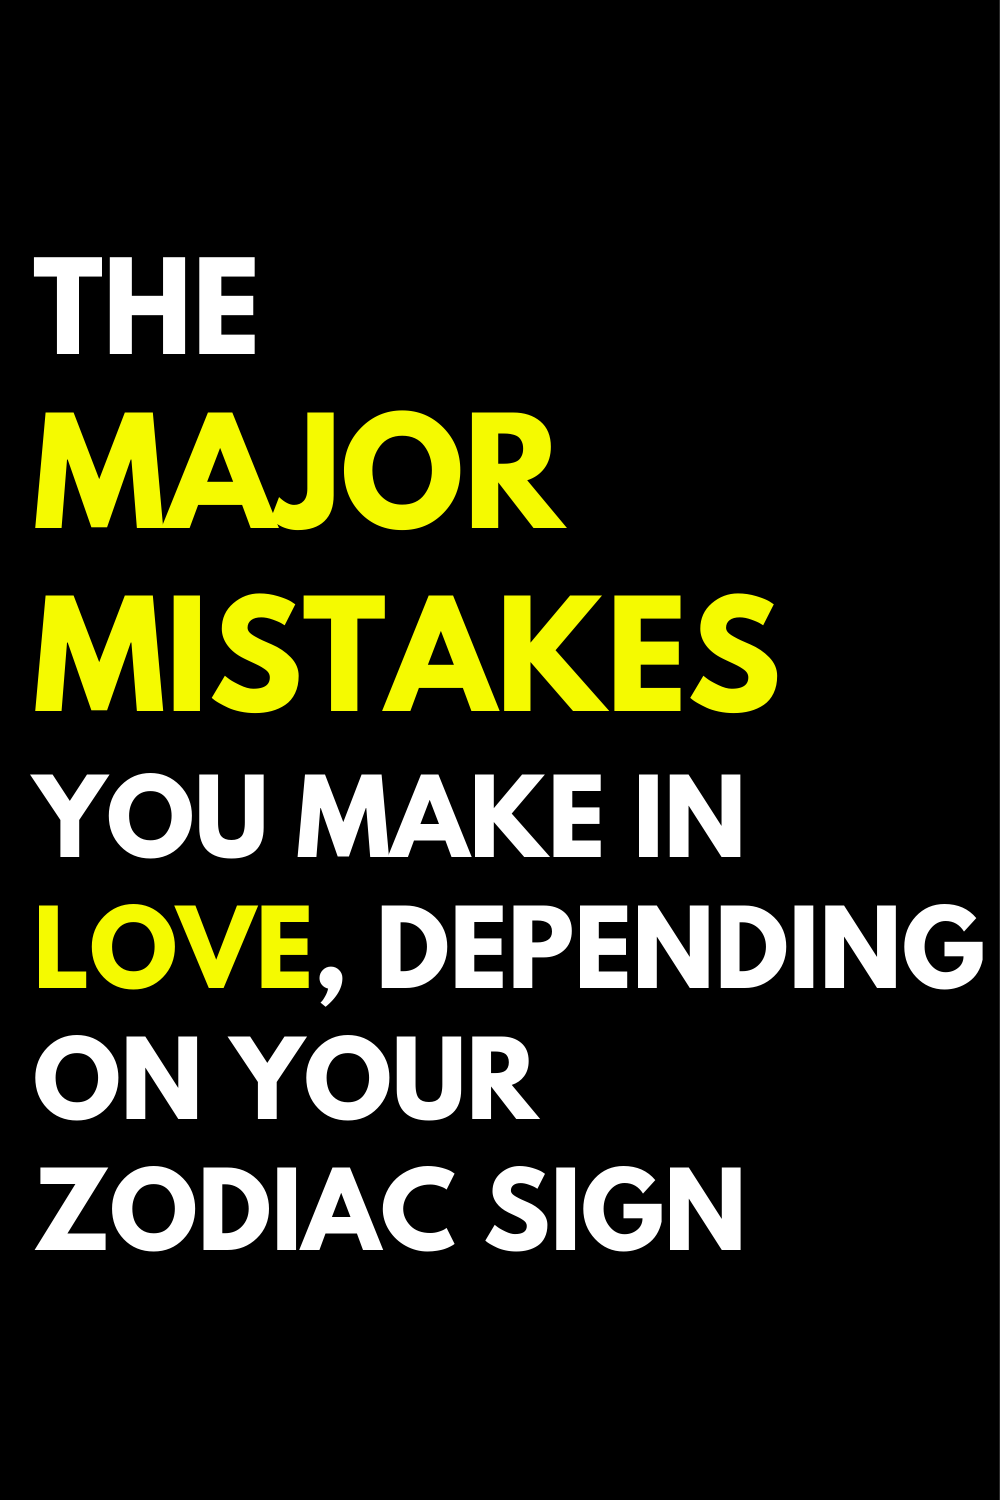 The major mistakes you make in love, depending on your zodiac sign